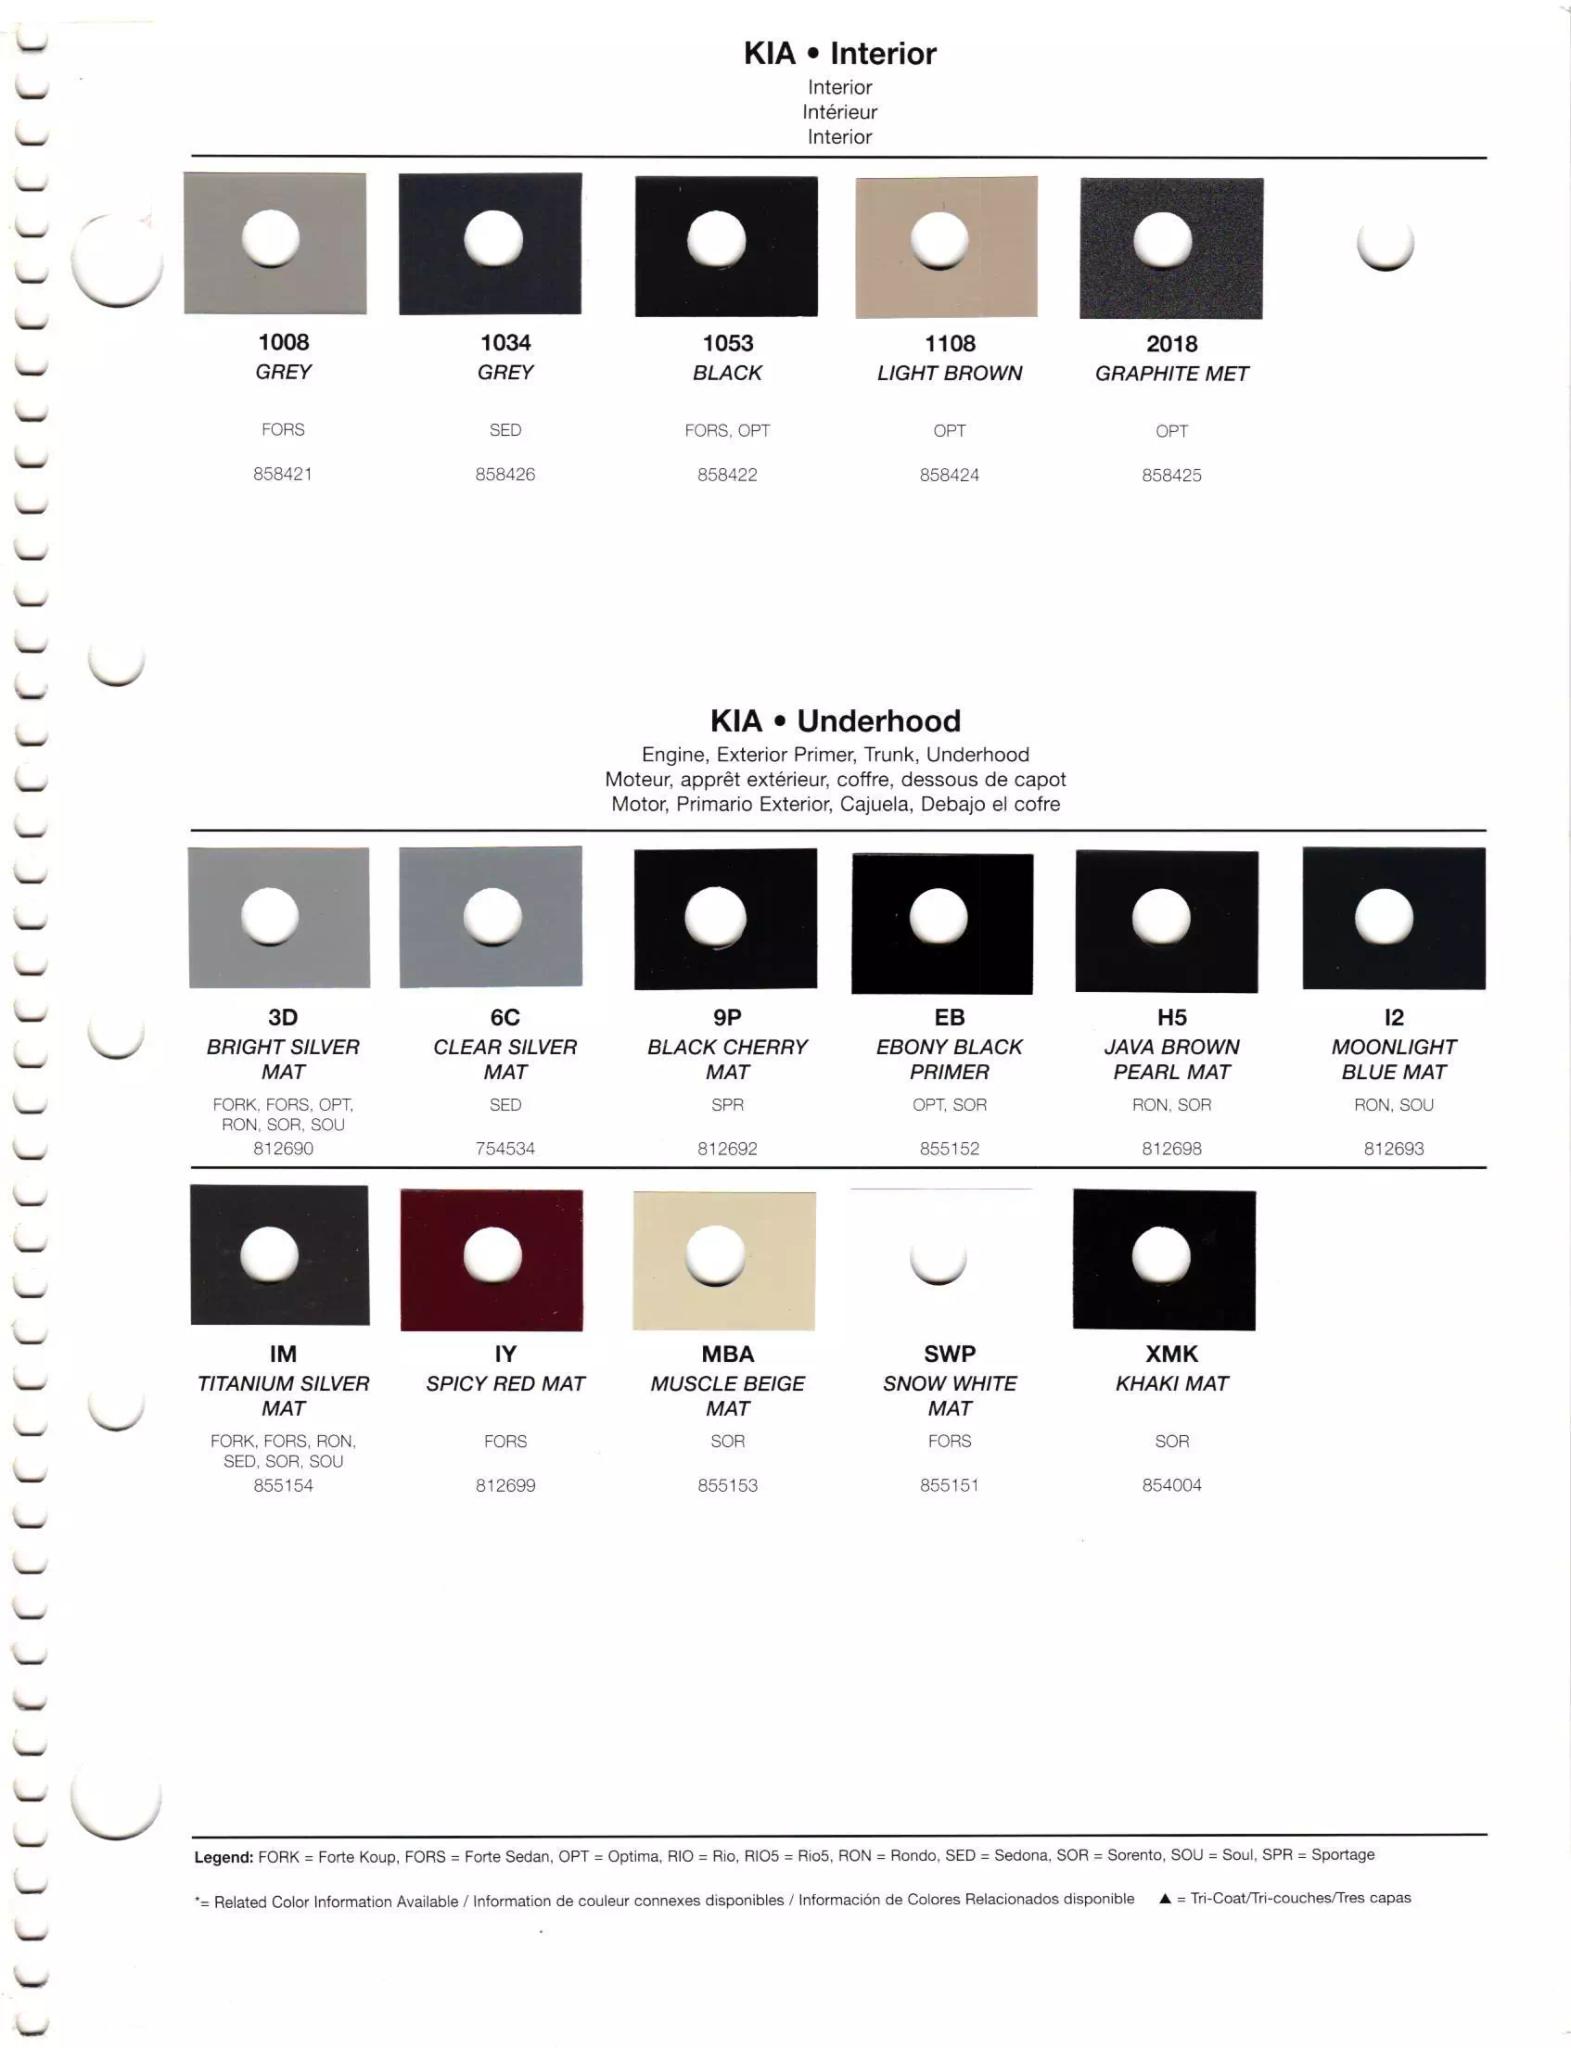 Color swatches and color codes/names for 2012 Kia's.